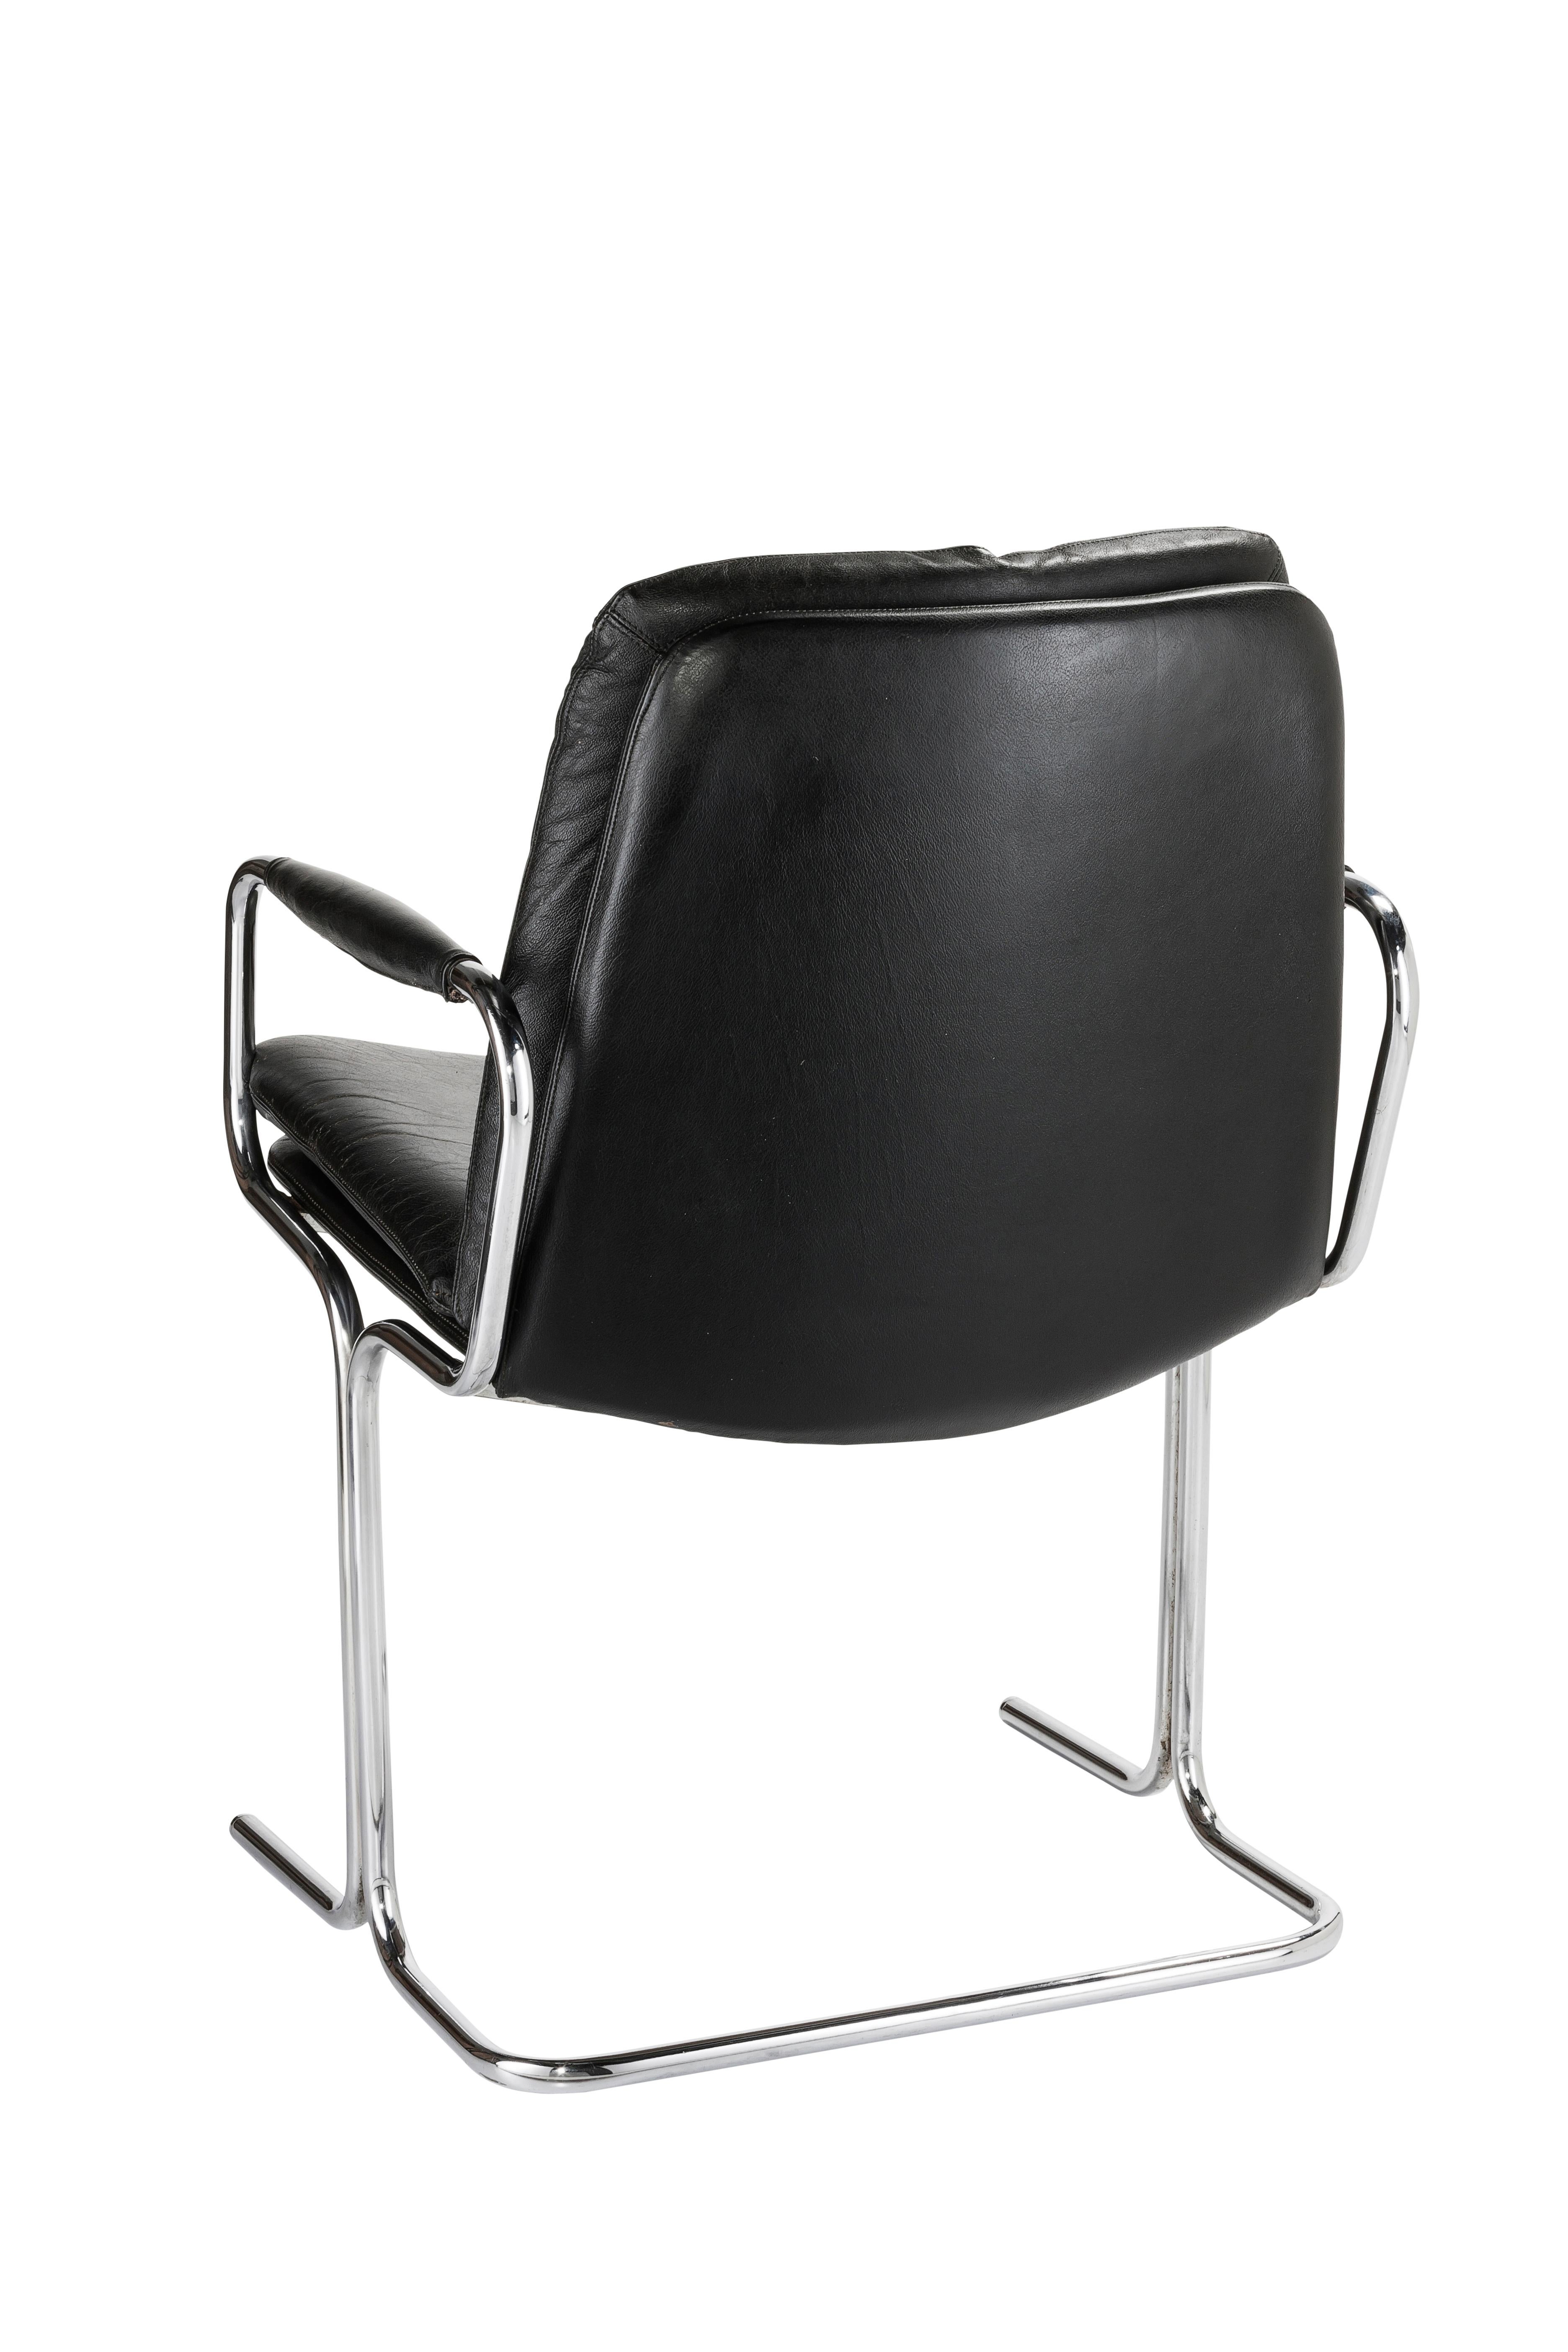 Modern Set of 4 Pieff 'Eleganza' Chrome and Leather Chairs by Tim Bates for Pieff & Co. For Sale